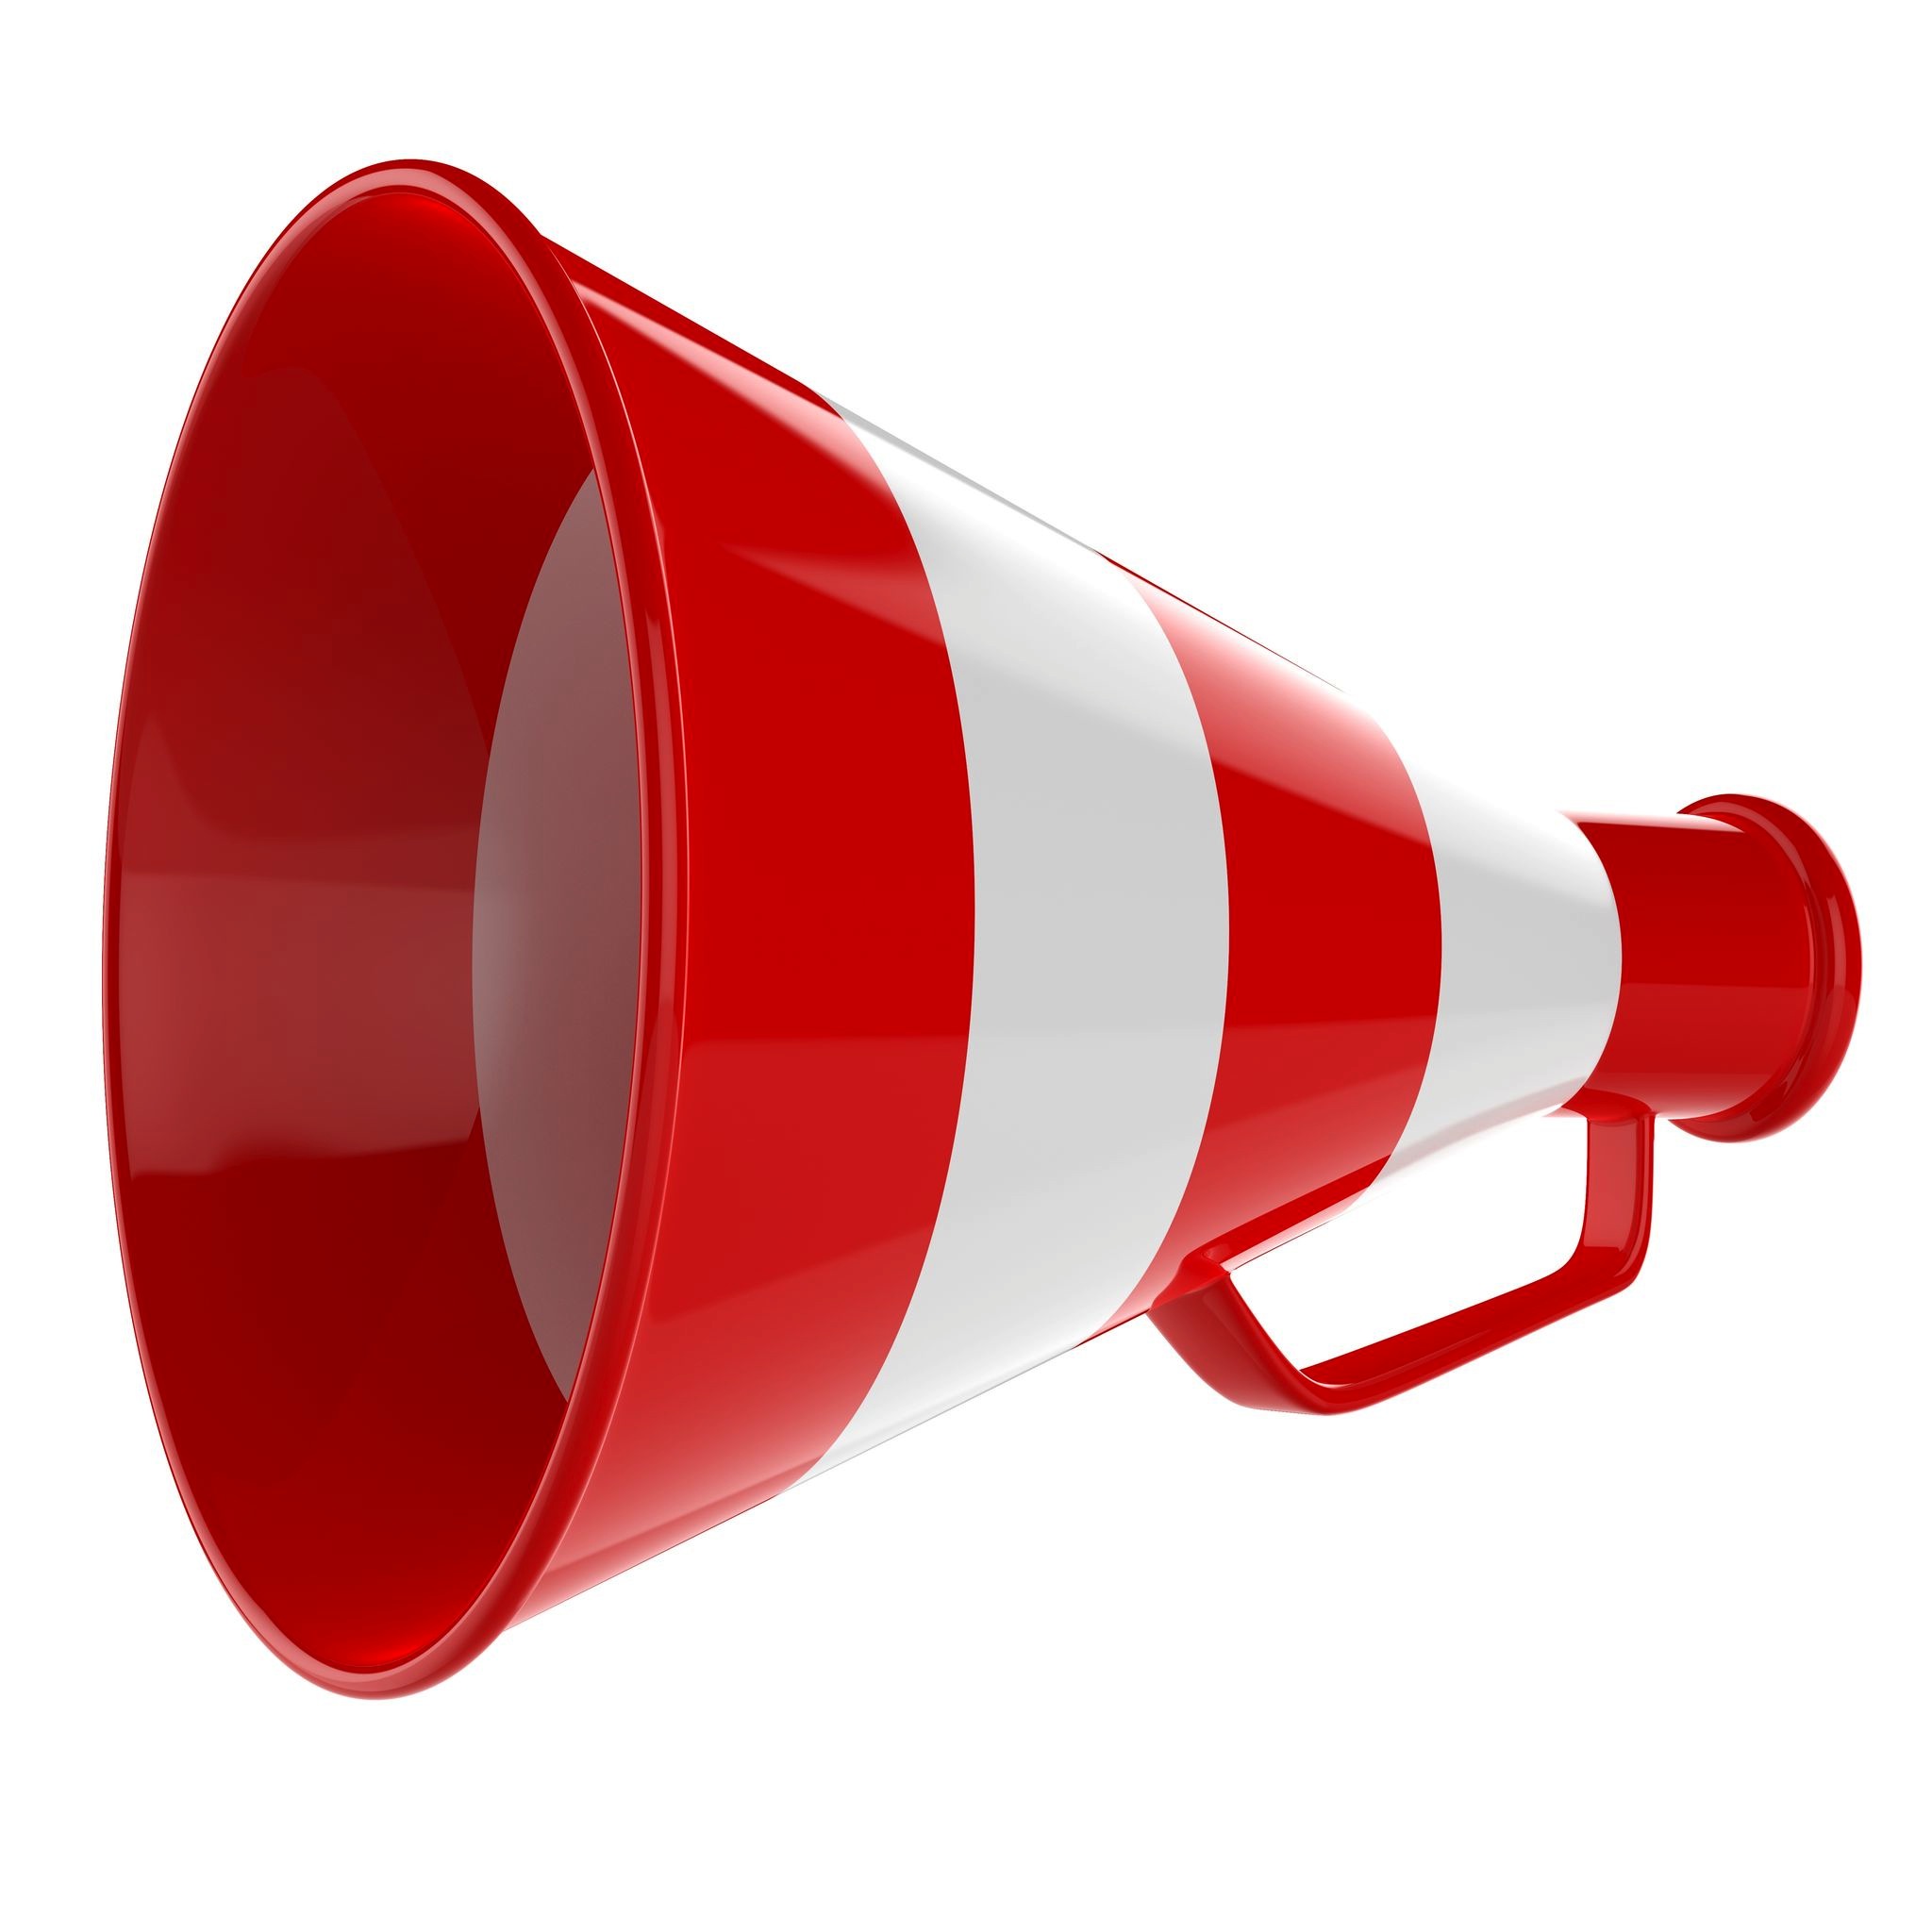 Red cheering megaphone clipart clipart image 1 - Clipartix